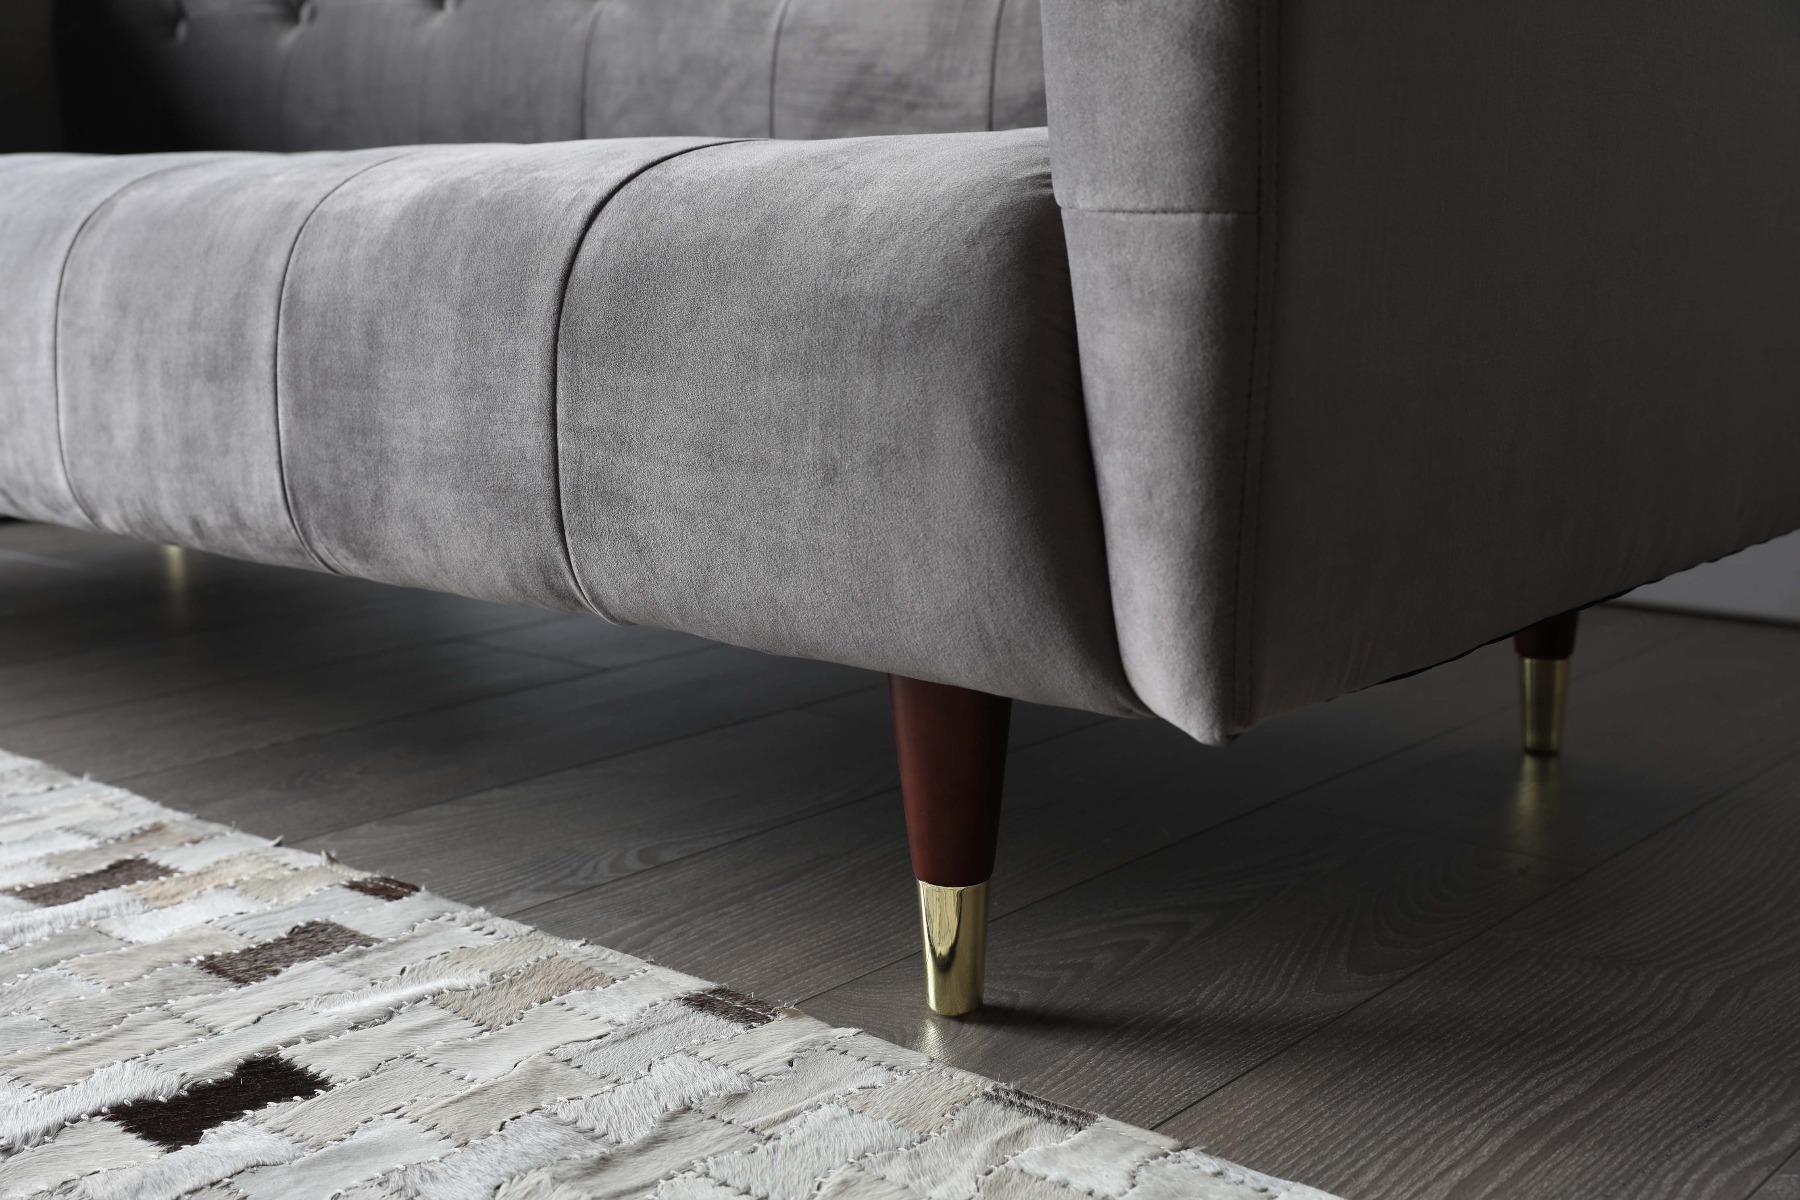 The solid wood legs are carefully handcrafted in a tapered and rounded shape, while golden capped brings a luxurious finishing to the design.